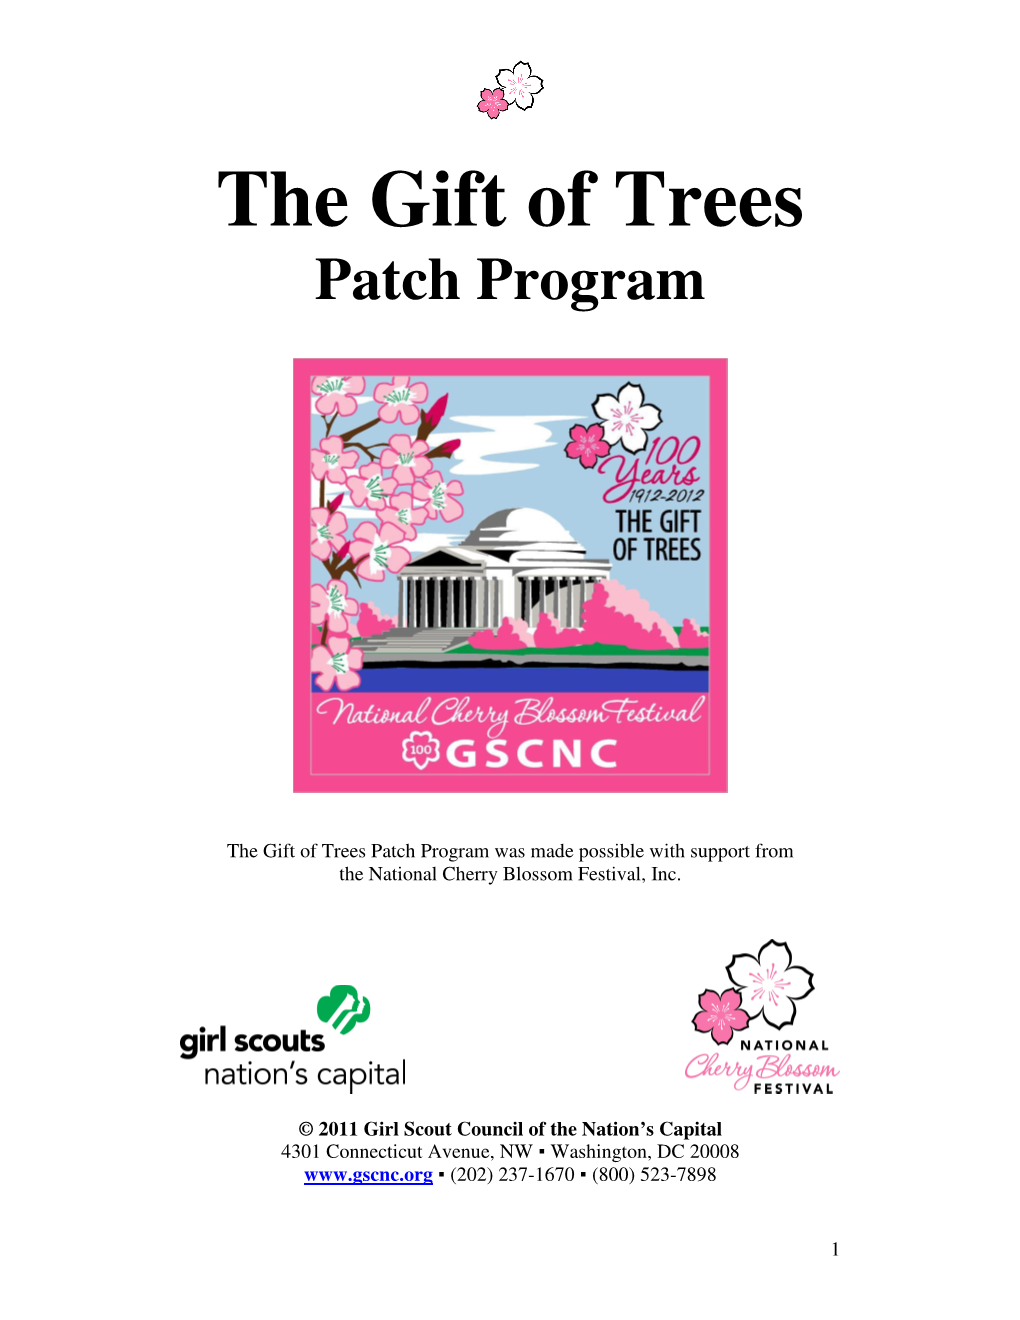 The Gift of Trees Patch Program